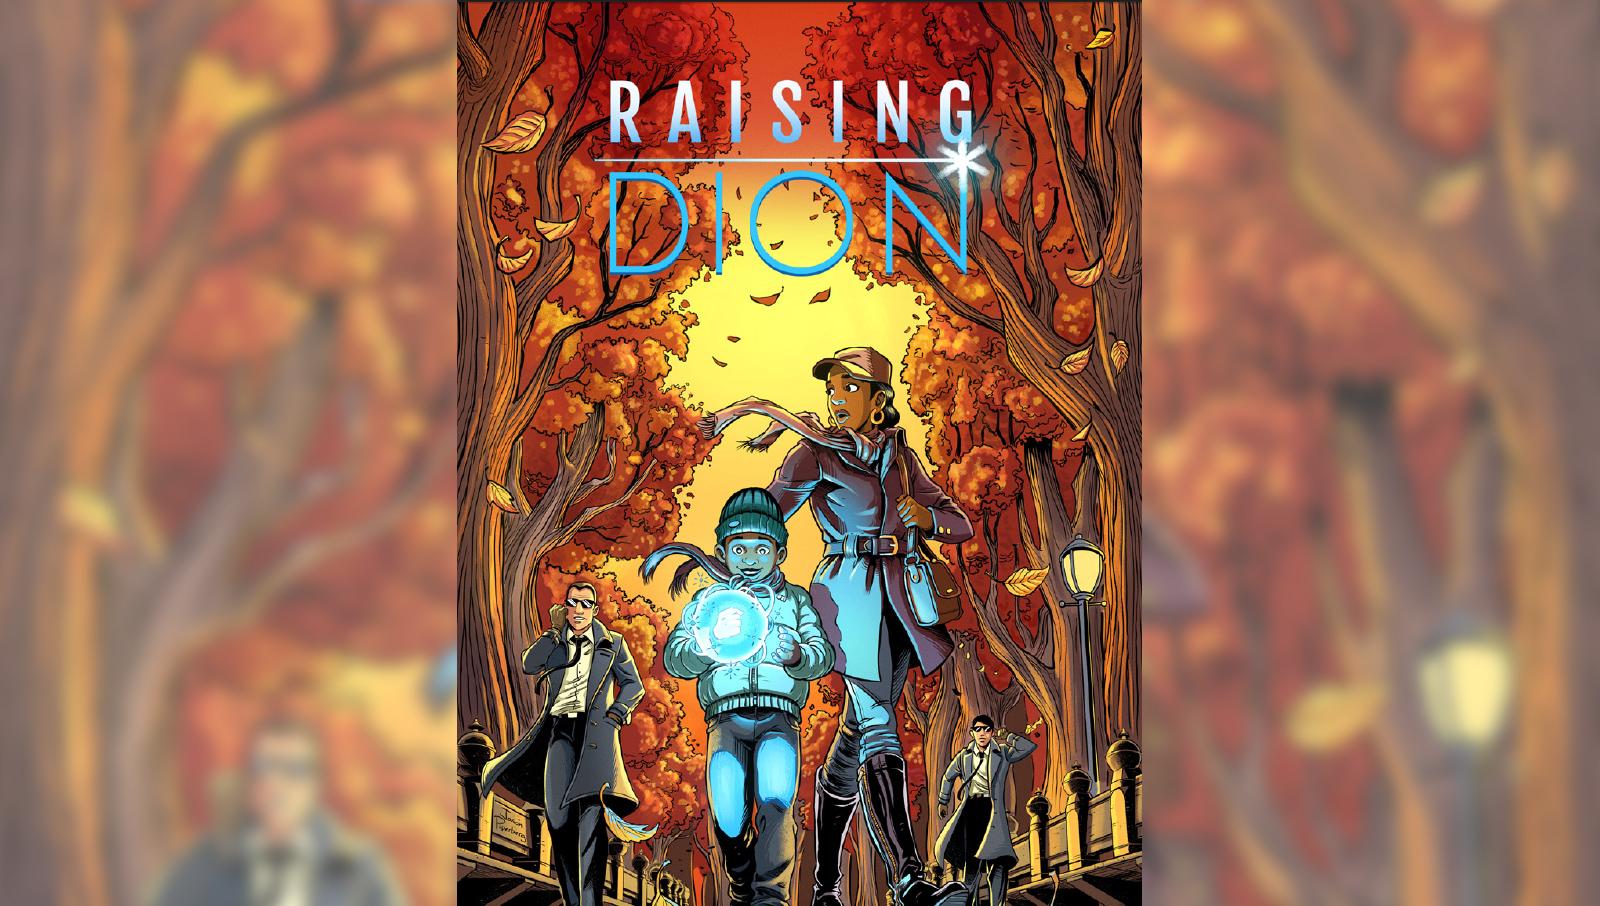 October Release Date Announced for Netflix's “Raising Dion